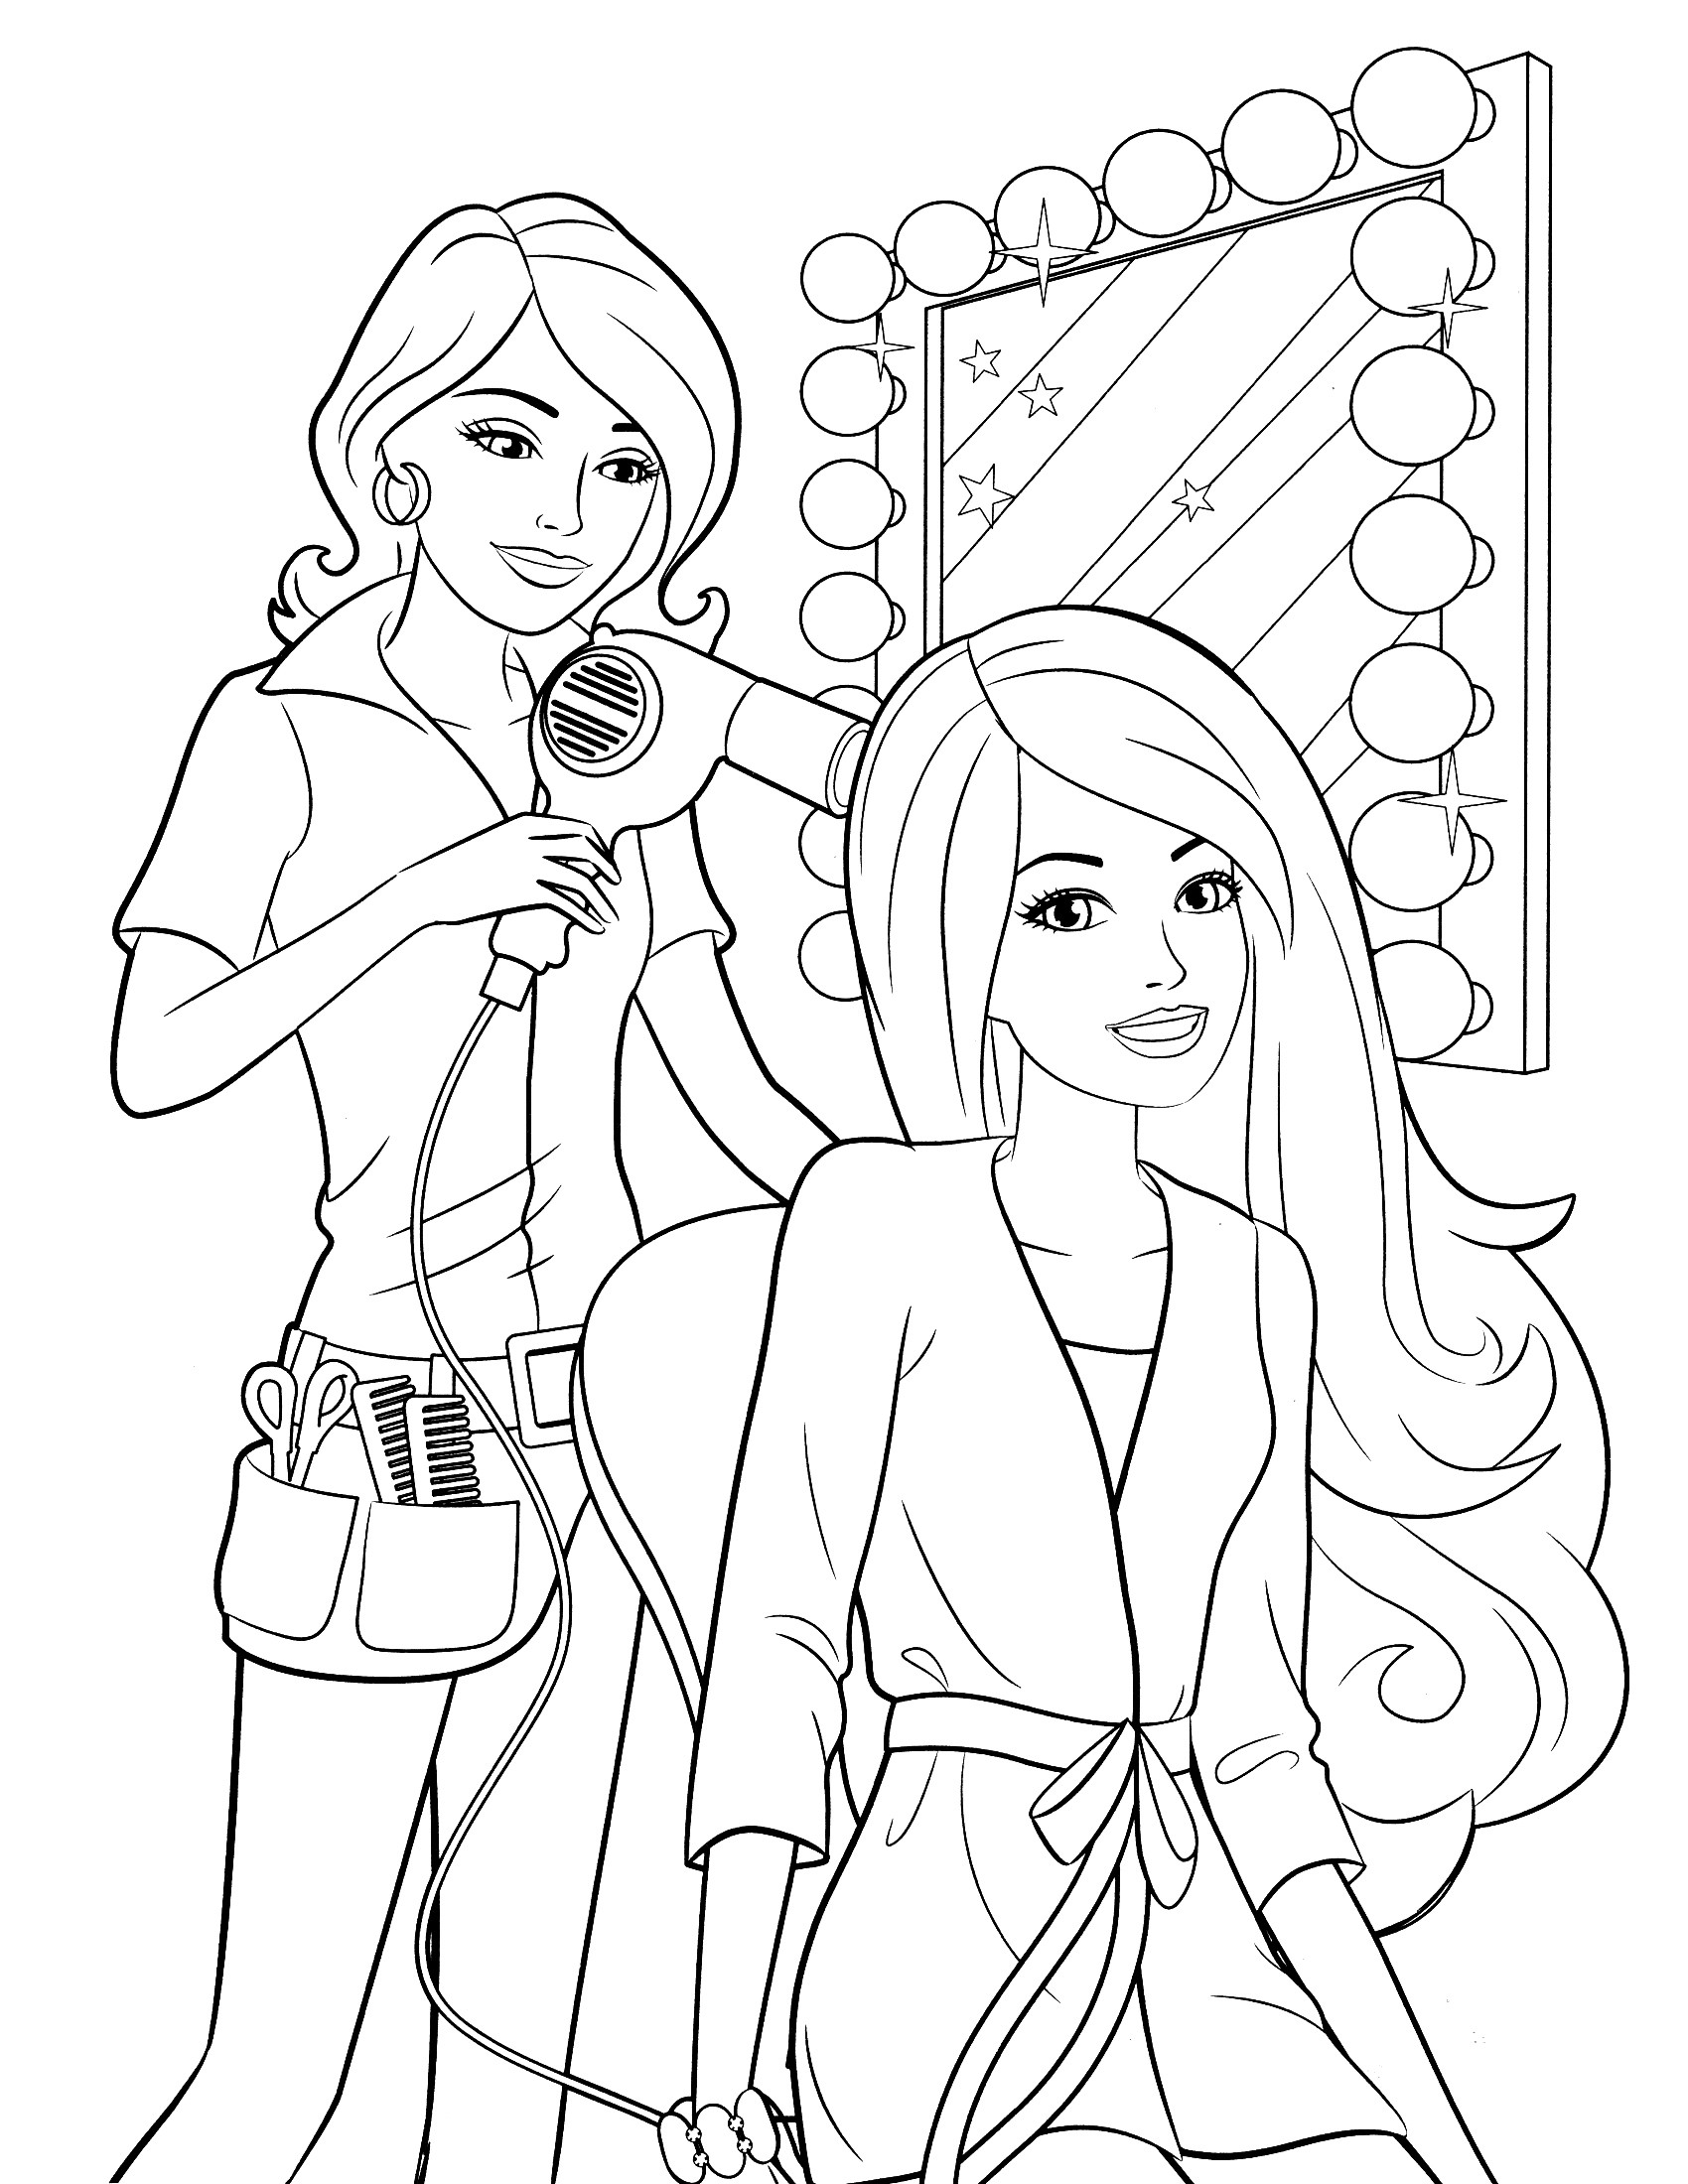 Coloring Pages For Girls 11 And Up Anime Griffens
 barbie coloring pages for girls